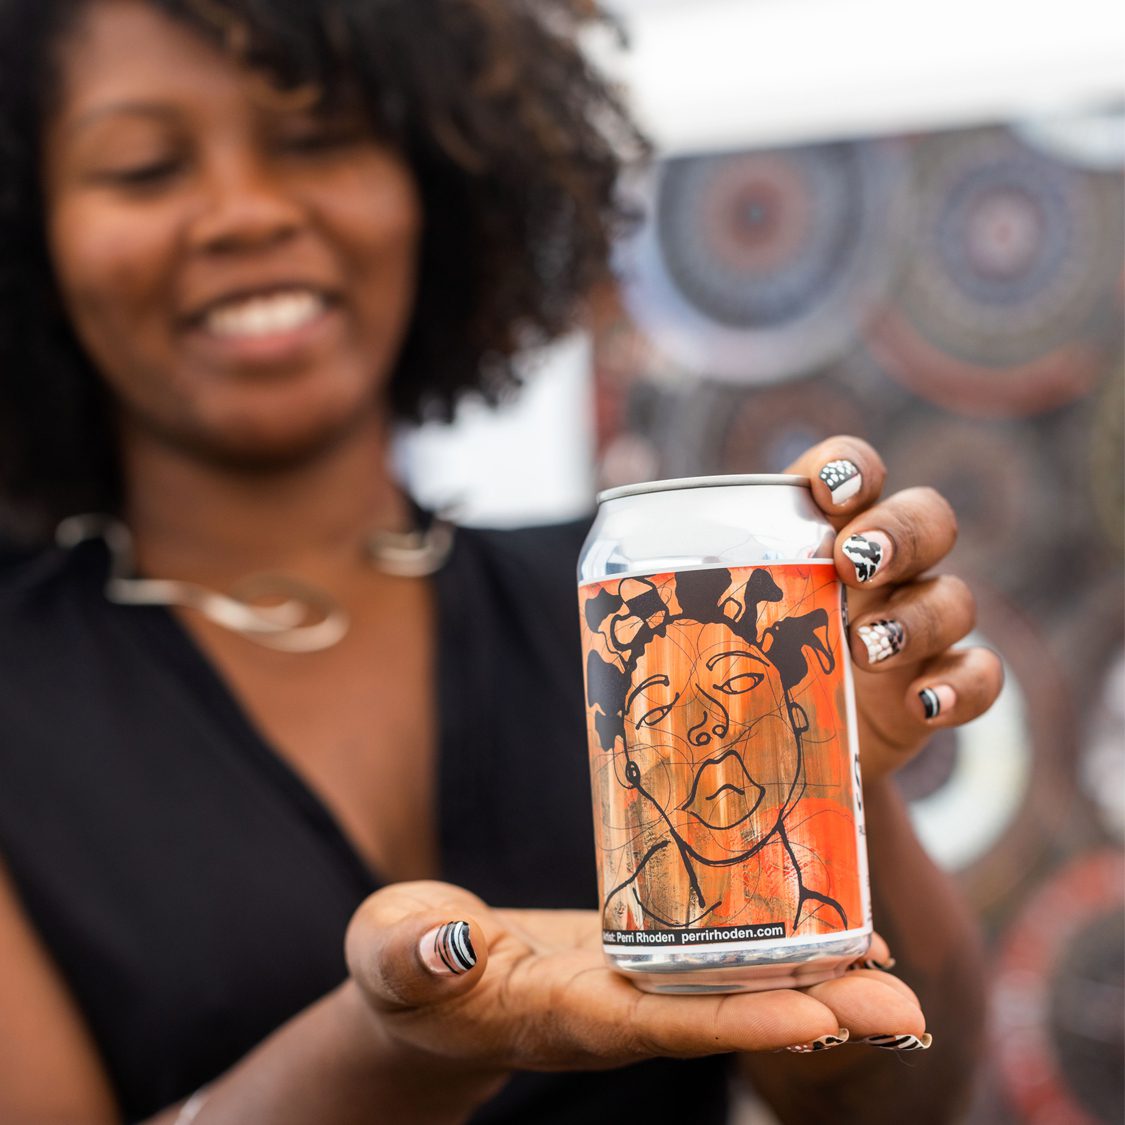 A person holding a Perri Rhoden beer in front of the camera.